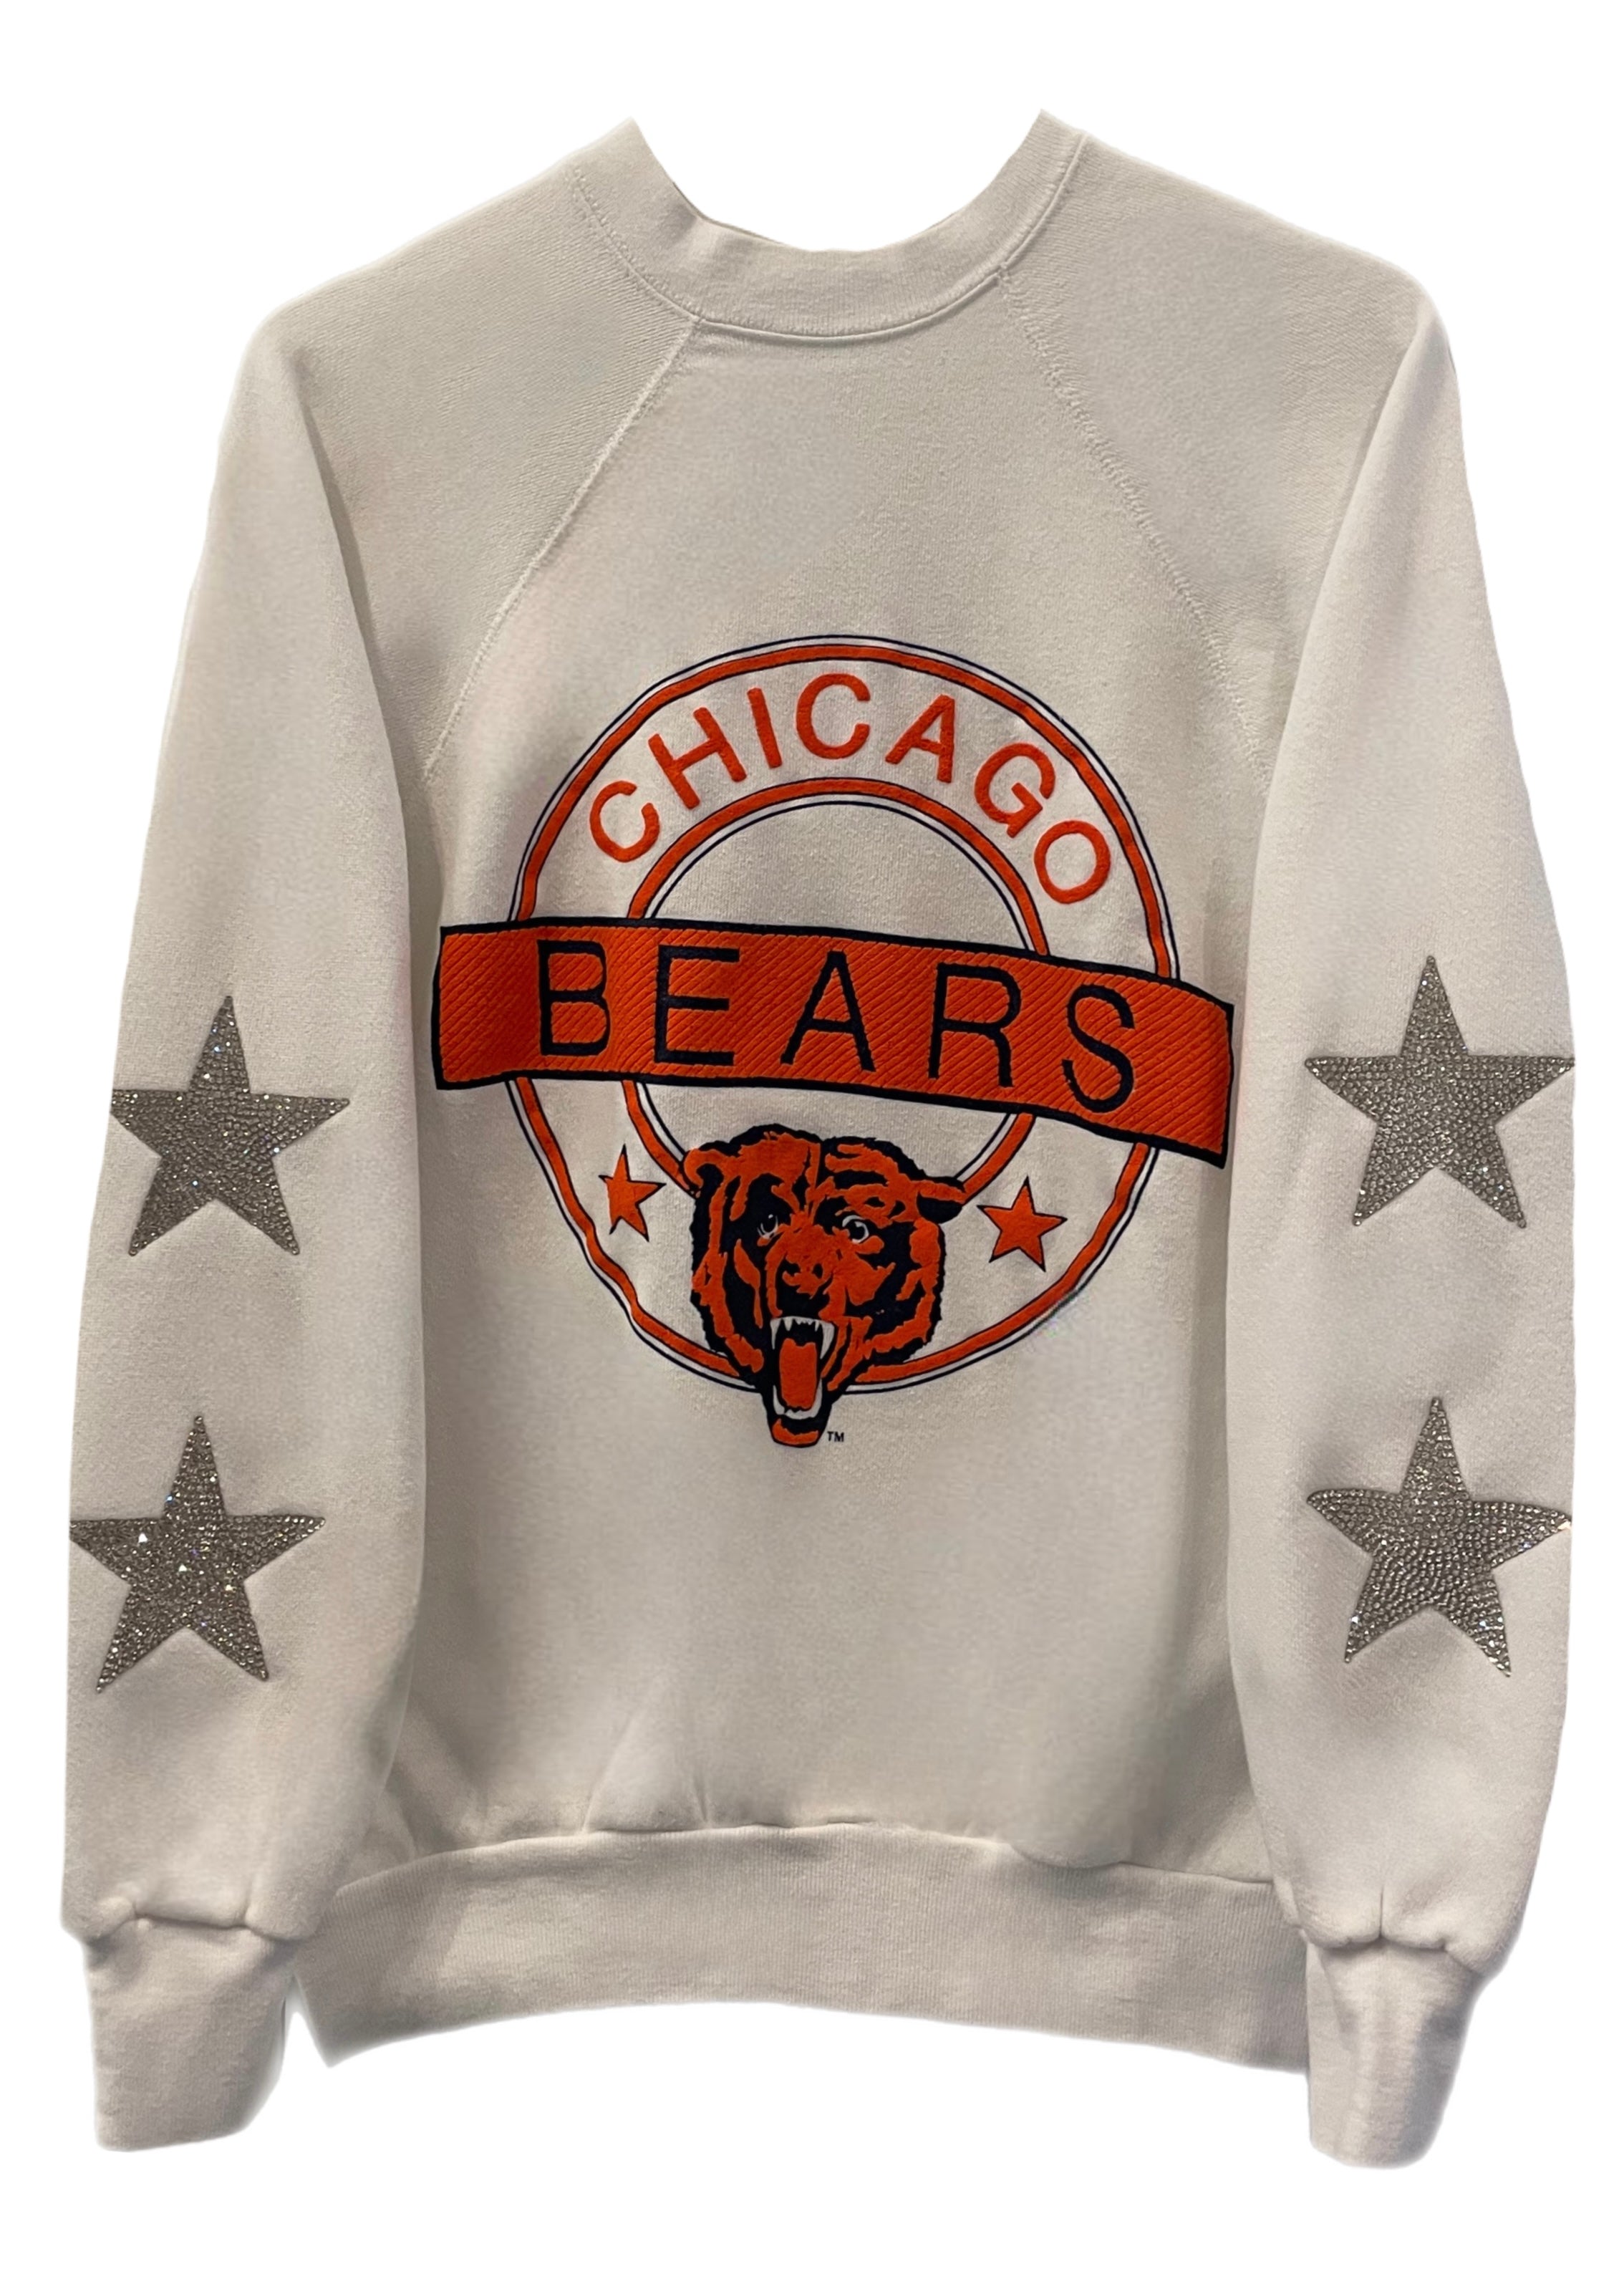 ShopCrystalRags Chicago Bears, NFL One of A Kind Rare Find Vintage Sweatshirt with Crystal Star Design